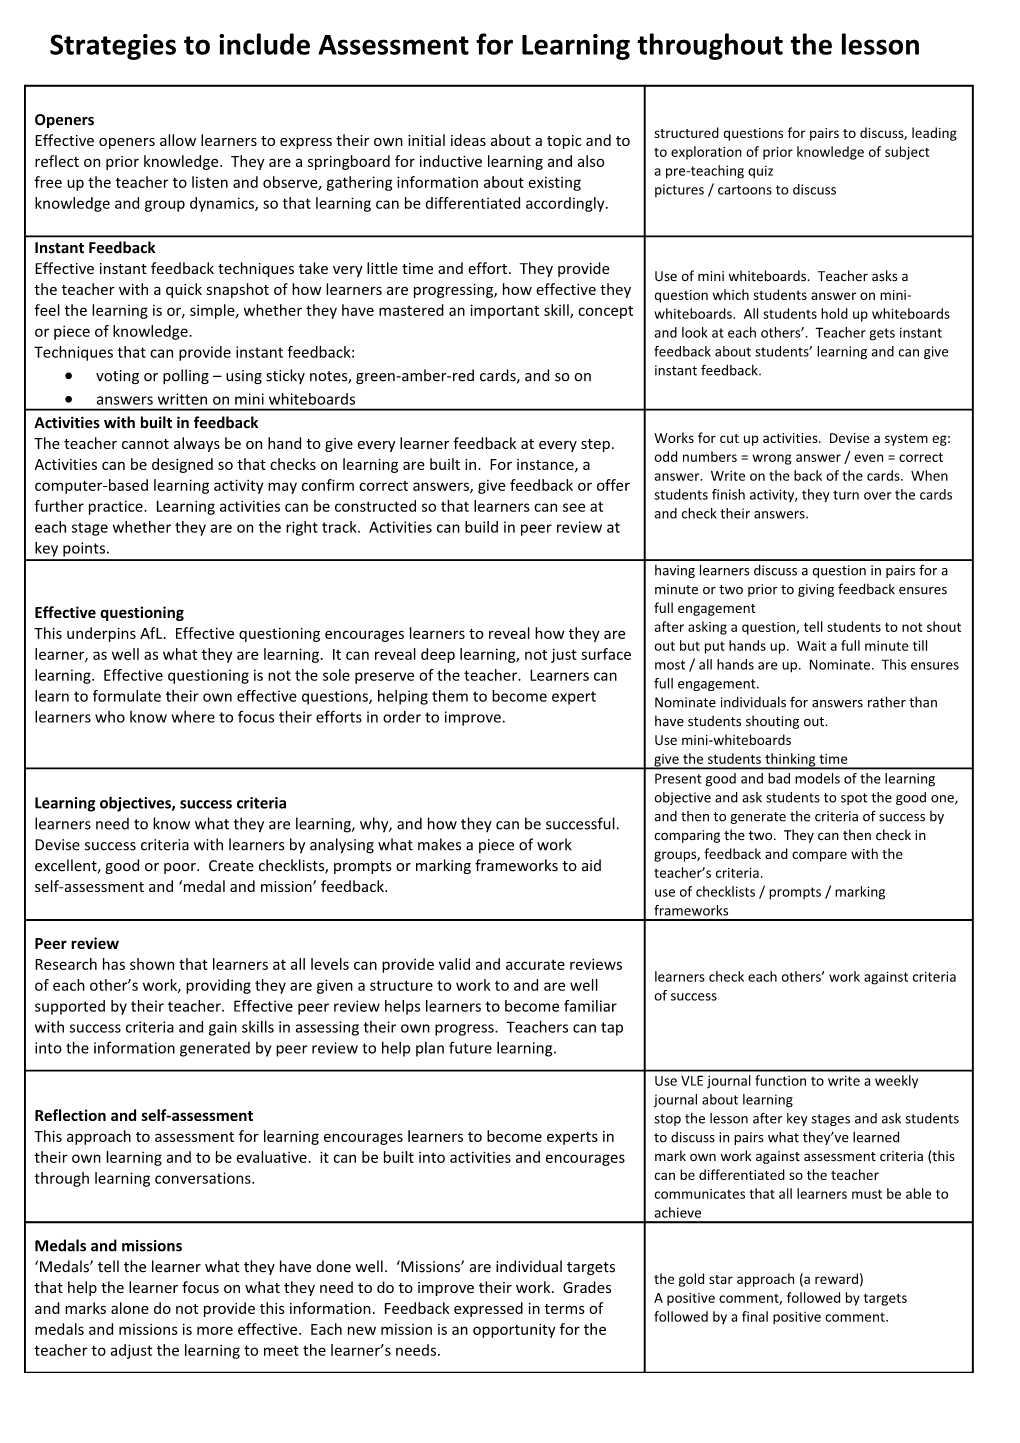 Strategies to Include Assessment for Learning Throughout the Lesson